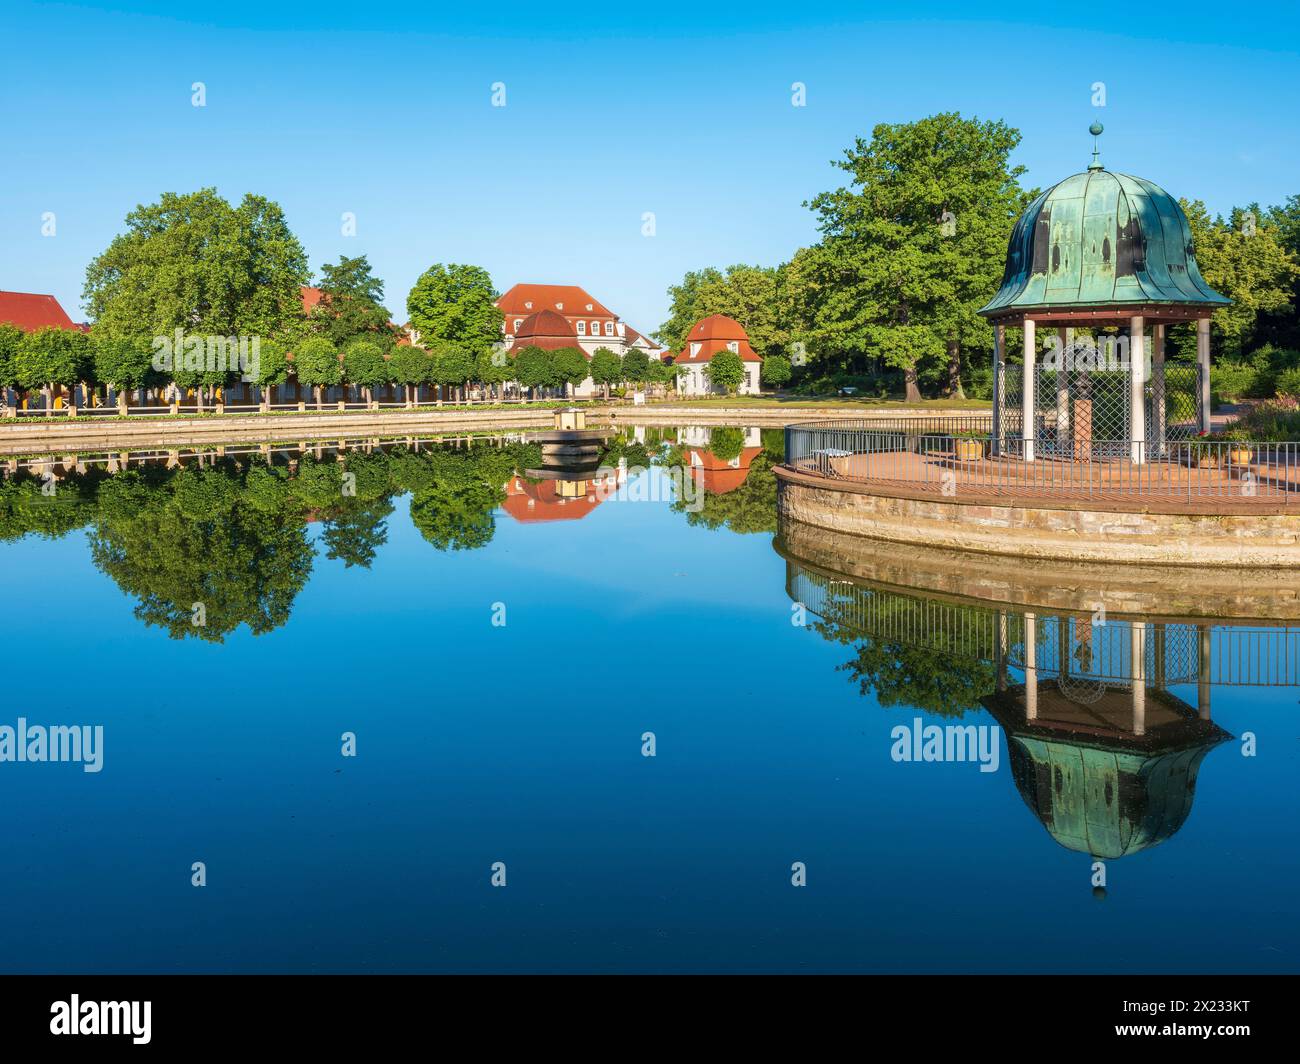 Historic spa facilities, park pond with Christiane-Vulpius pavilion, Goethe town of Bad Lauchstaedt, Saxony-Anhalt, Germany Stock Photo